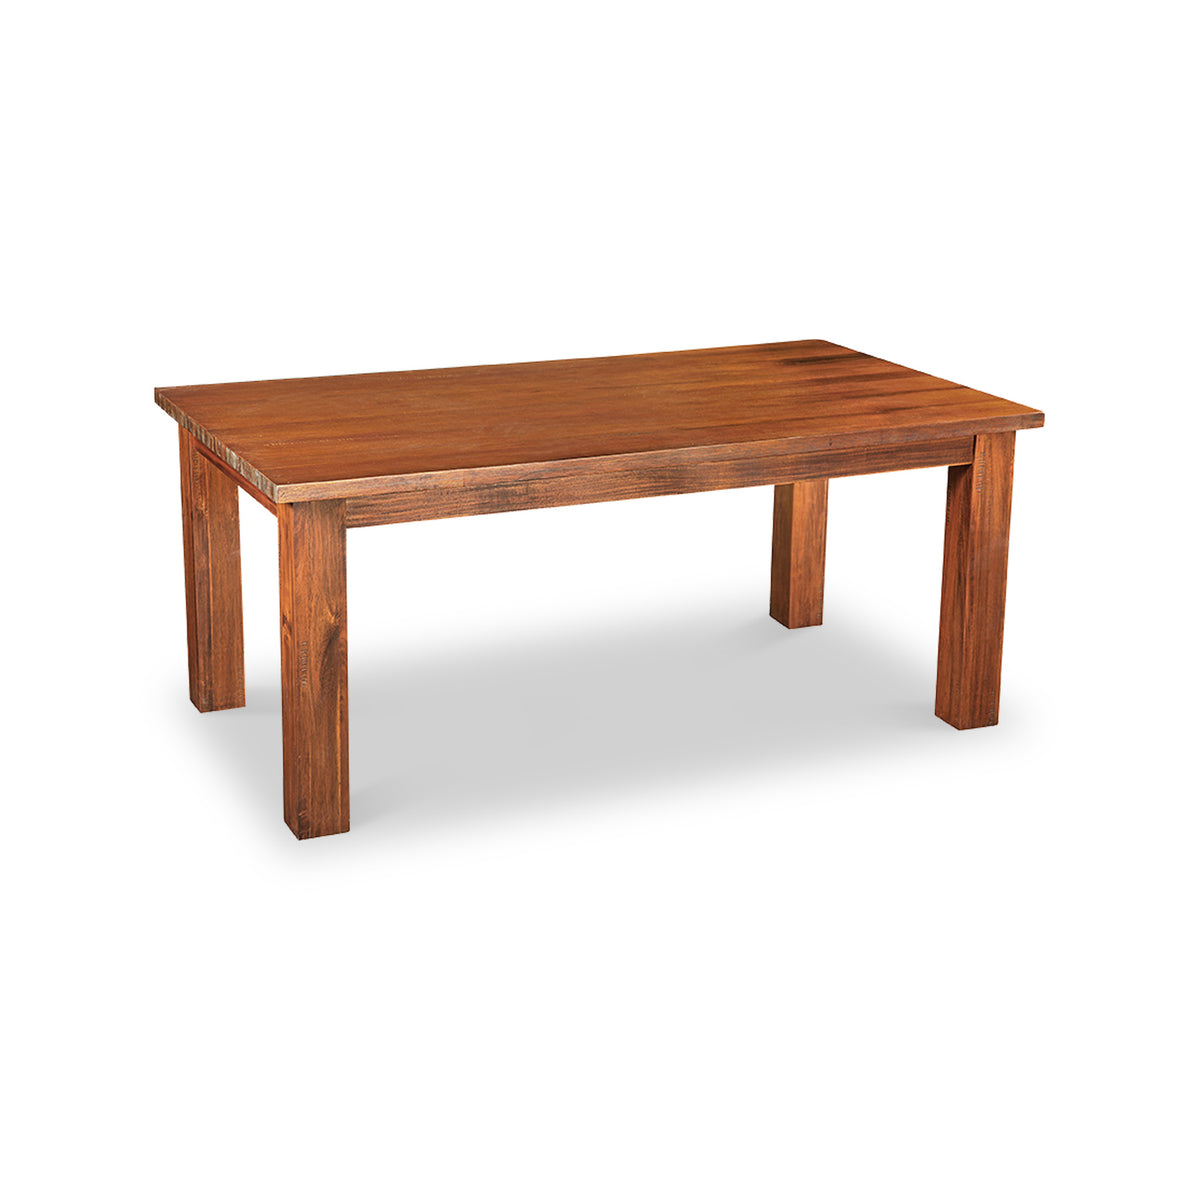 Ladock Acacia 150cm Dining Table from Roseland Furnituire